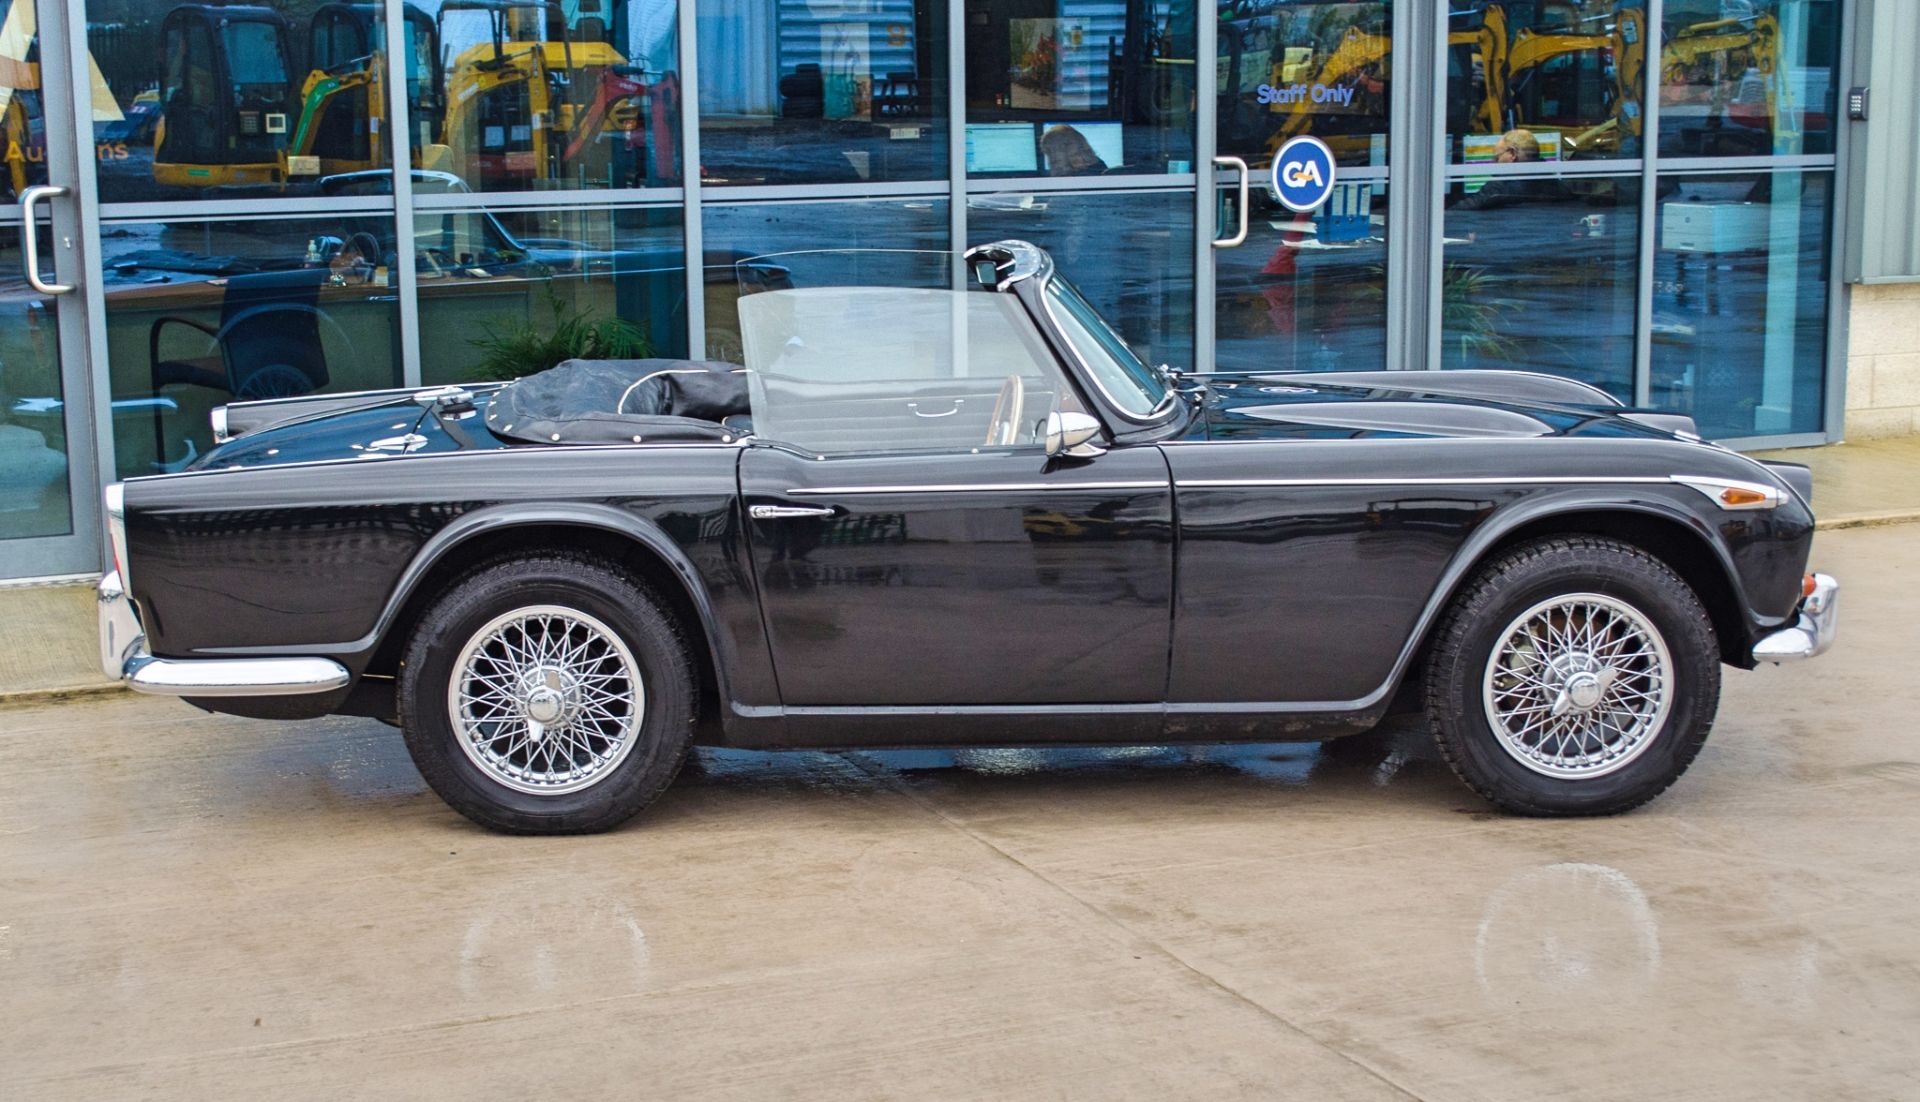 1967 Triumph TR4A IRS 2135cc convertible - Image 14 of 56